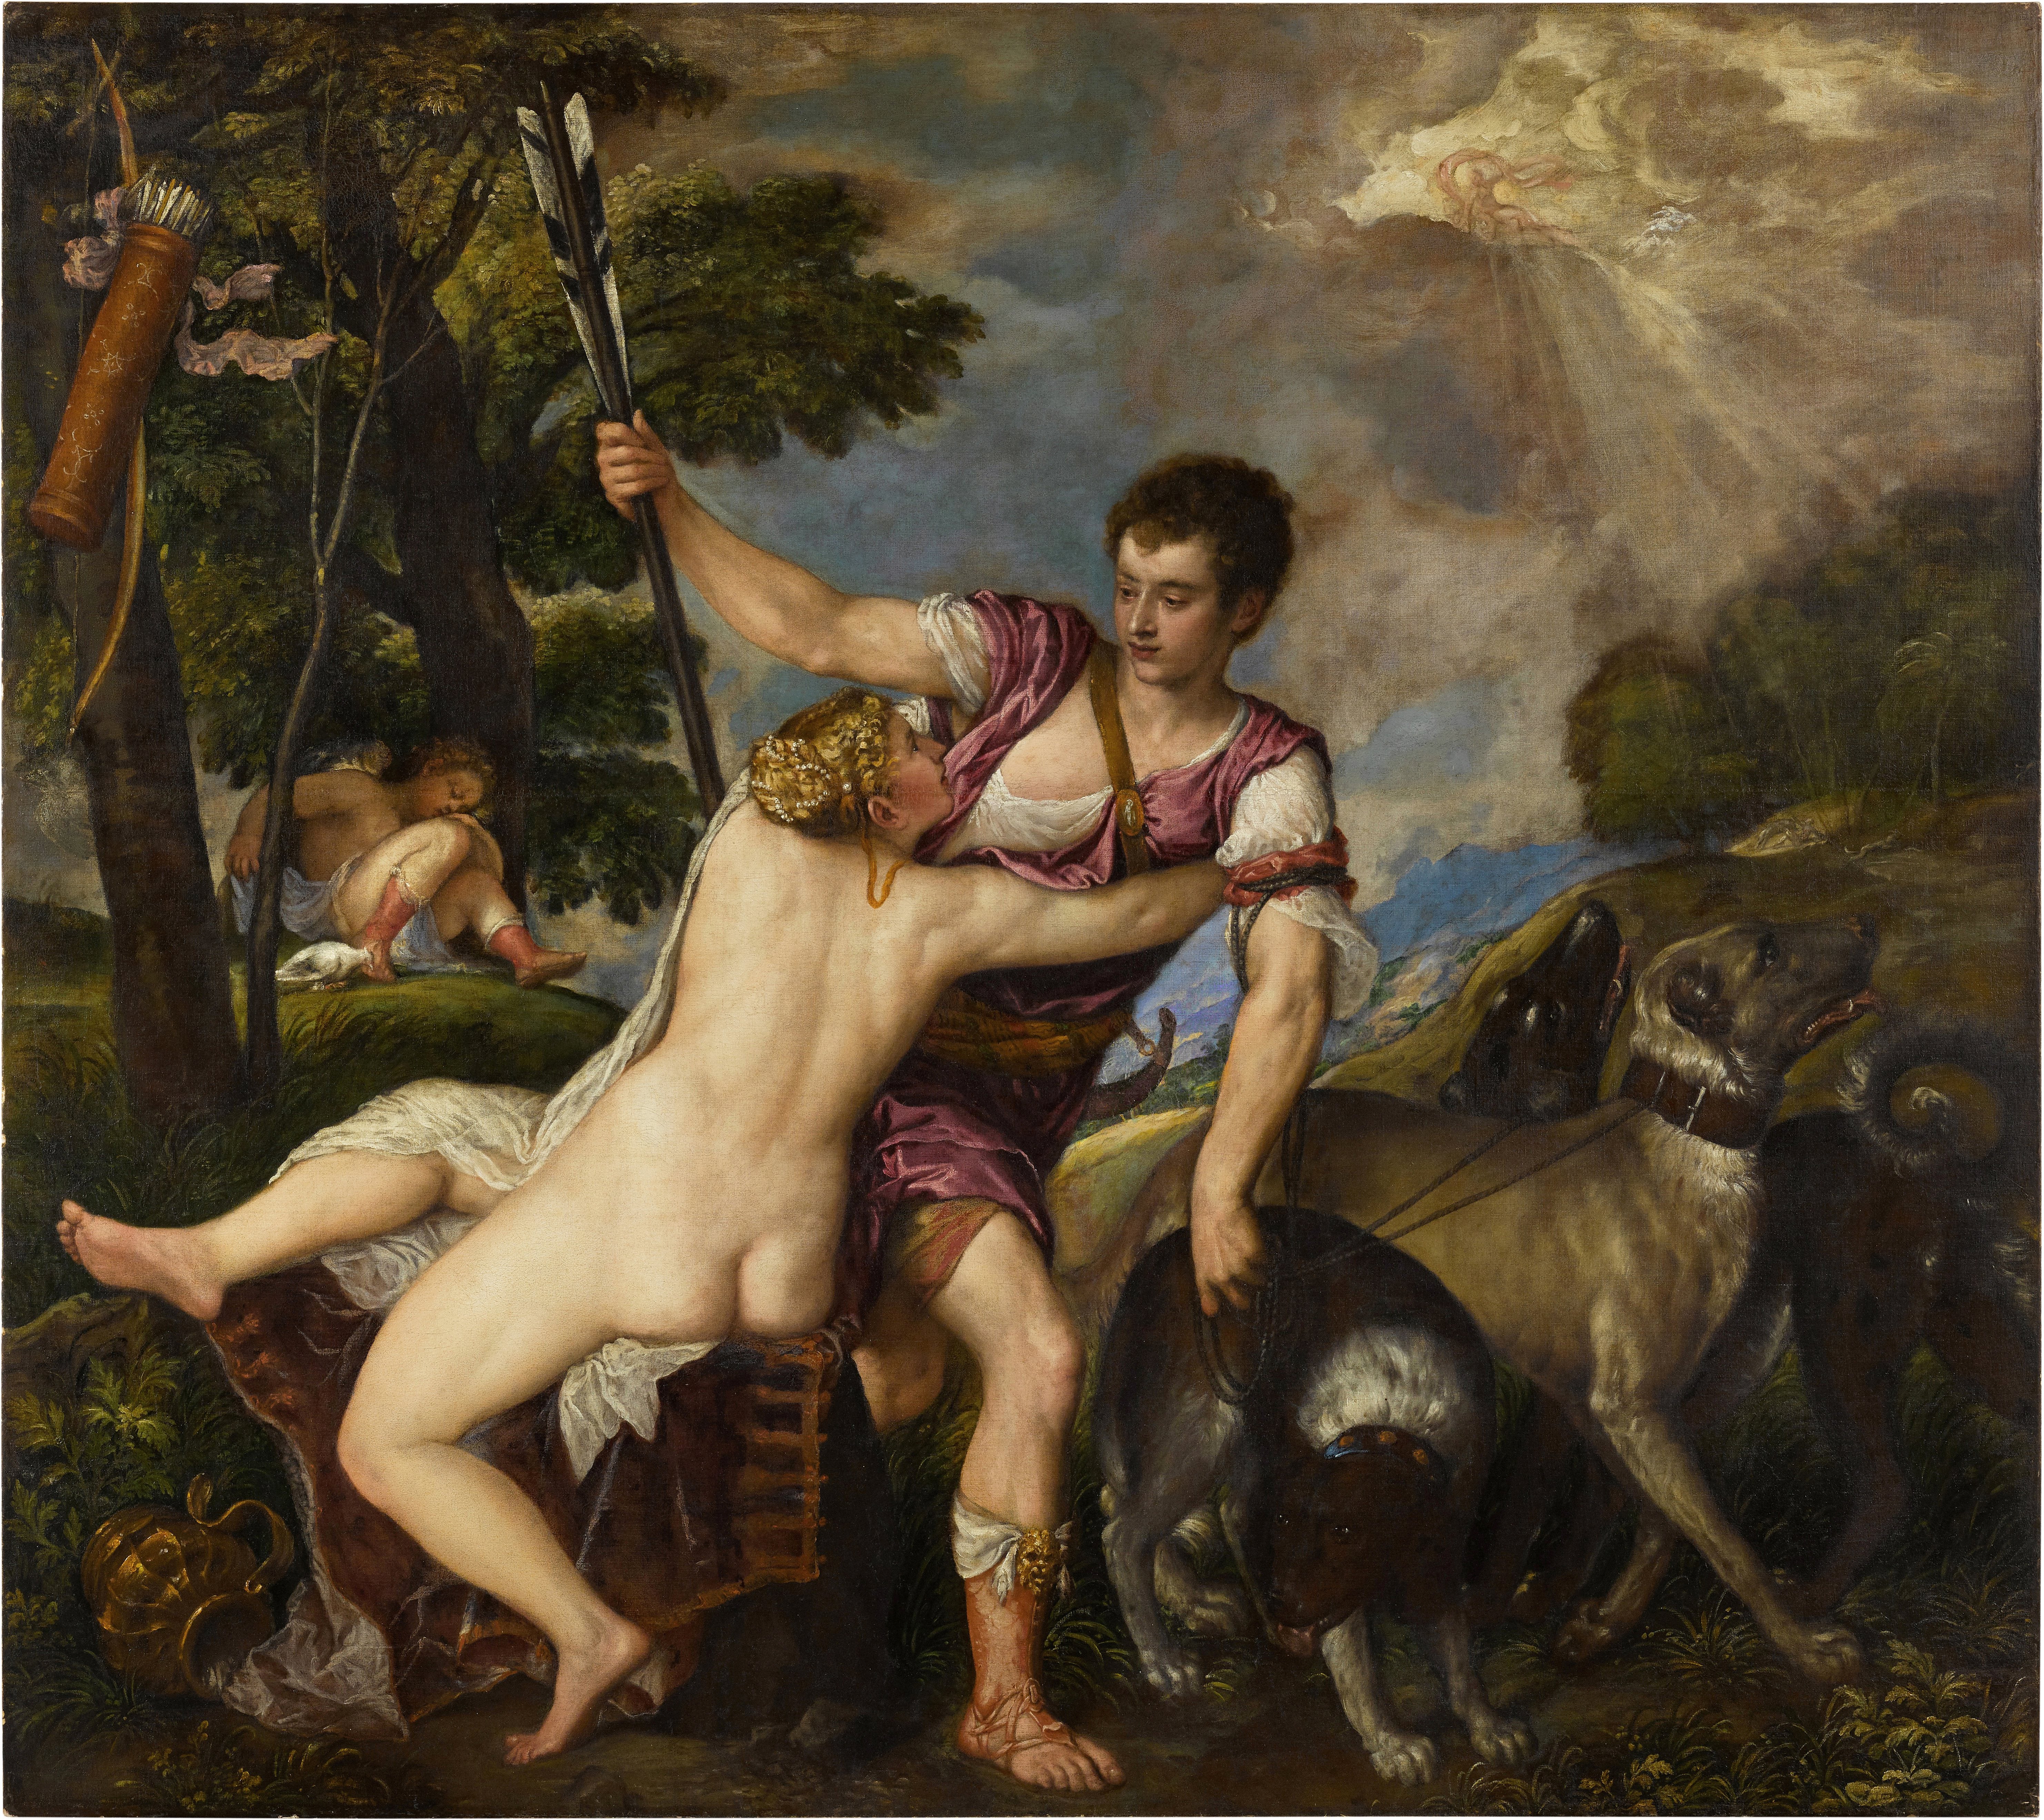 A version of Venus and Adonis by Titian